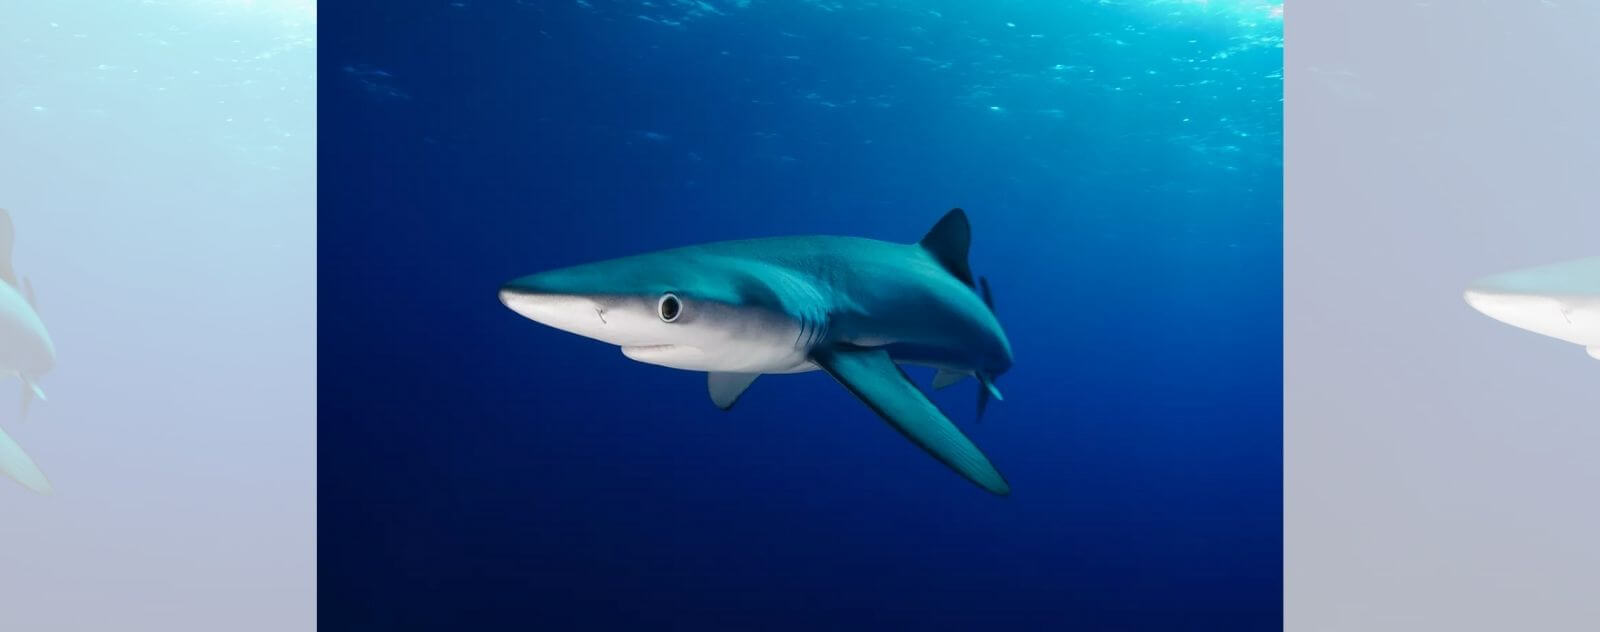 Blue Shark in the Sea Surrounded by Dark Water